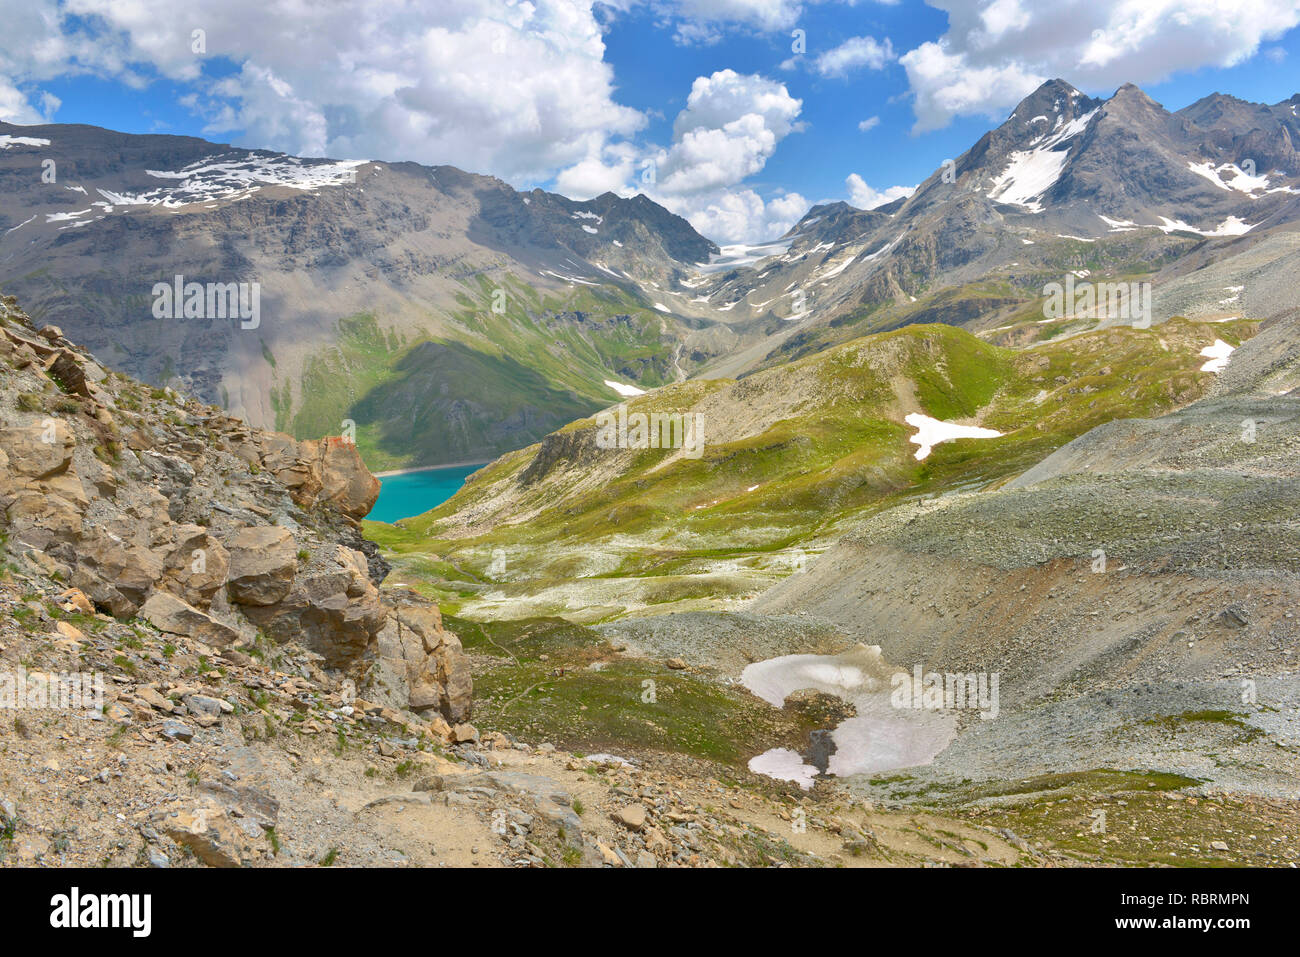 alpine mountain under cloudy sky with view on a blue lake far off Stock Photo